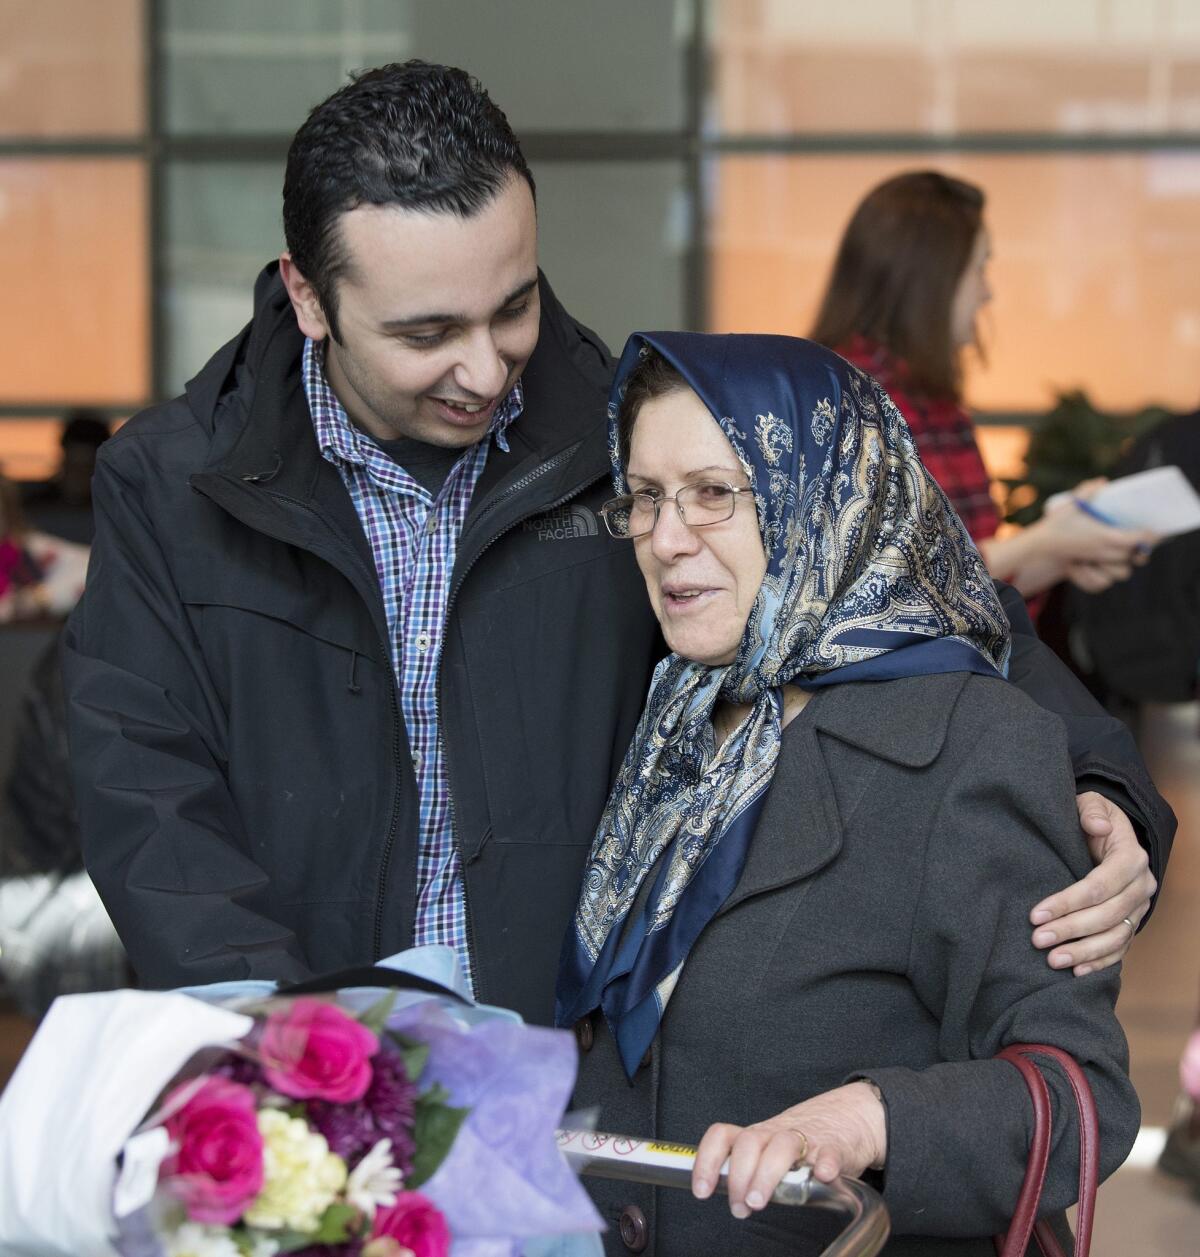 Sanam Mirzai, right, is greeted by her son as she arrives at Logan International Airport in Boston on Saturday.